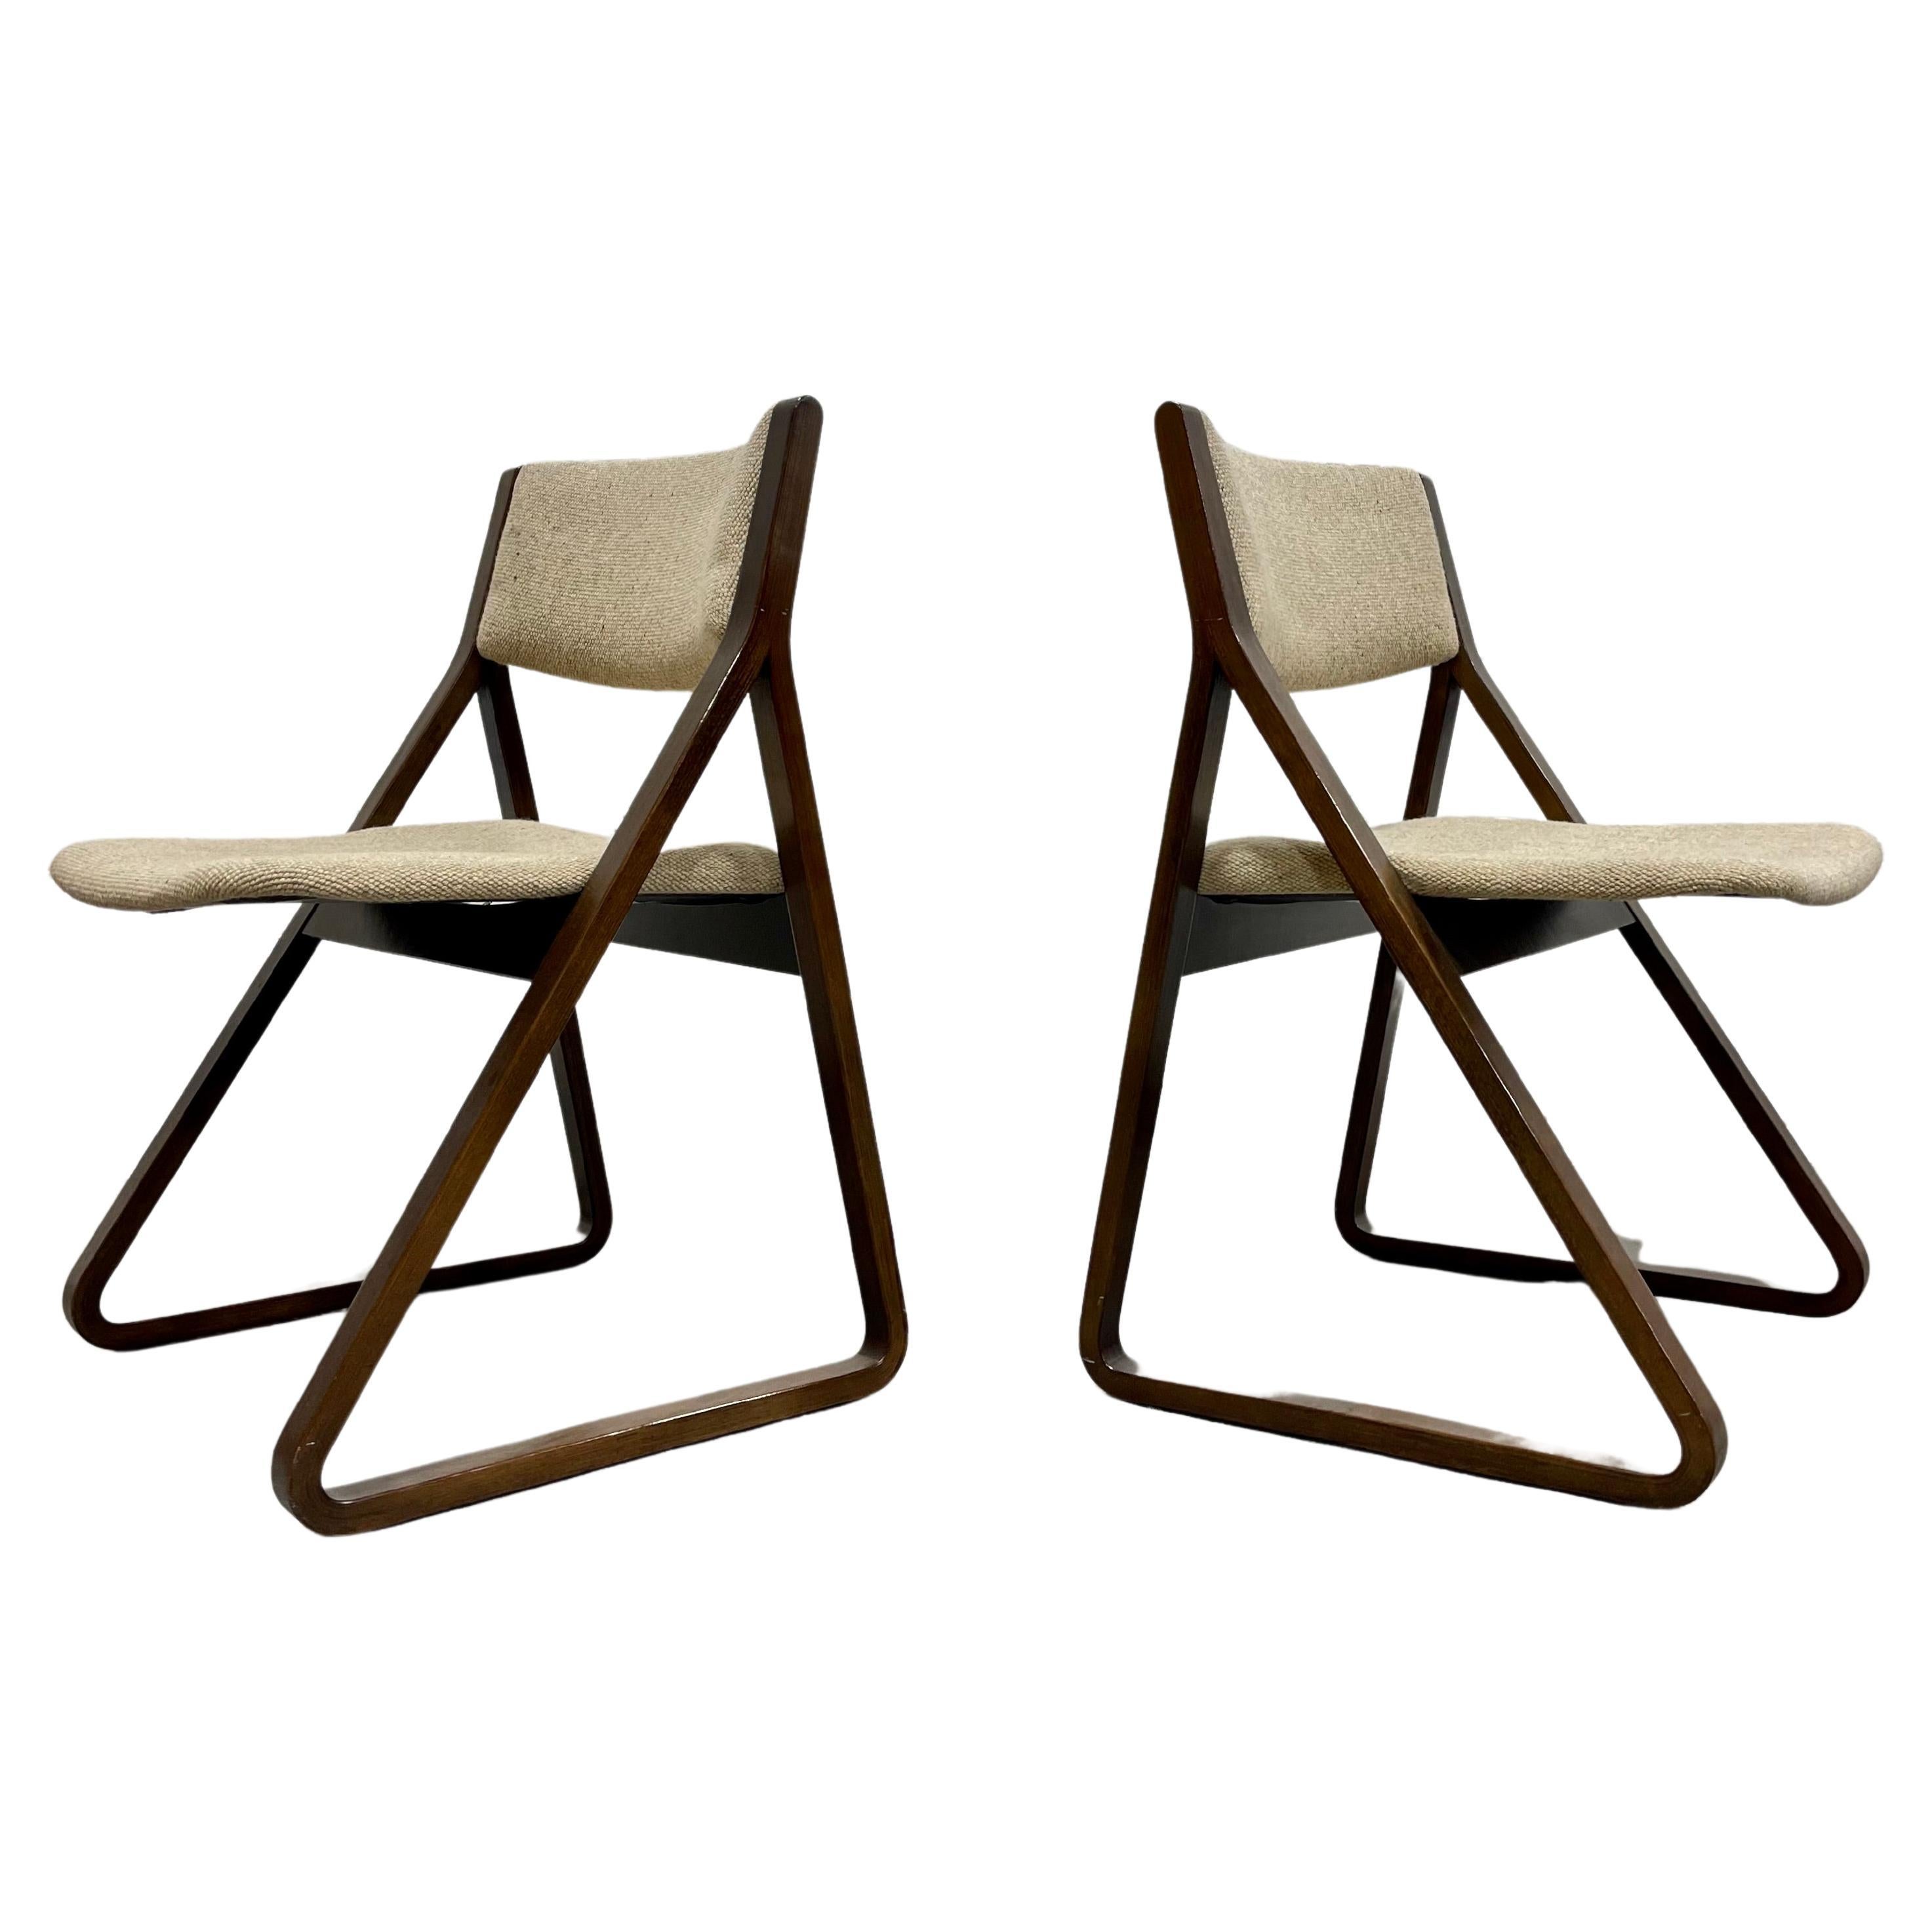 Pair of Mid Century MODERN "TRIANGLE" CHAIRS by Stow Davis, c.1960's